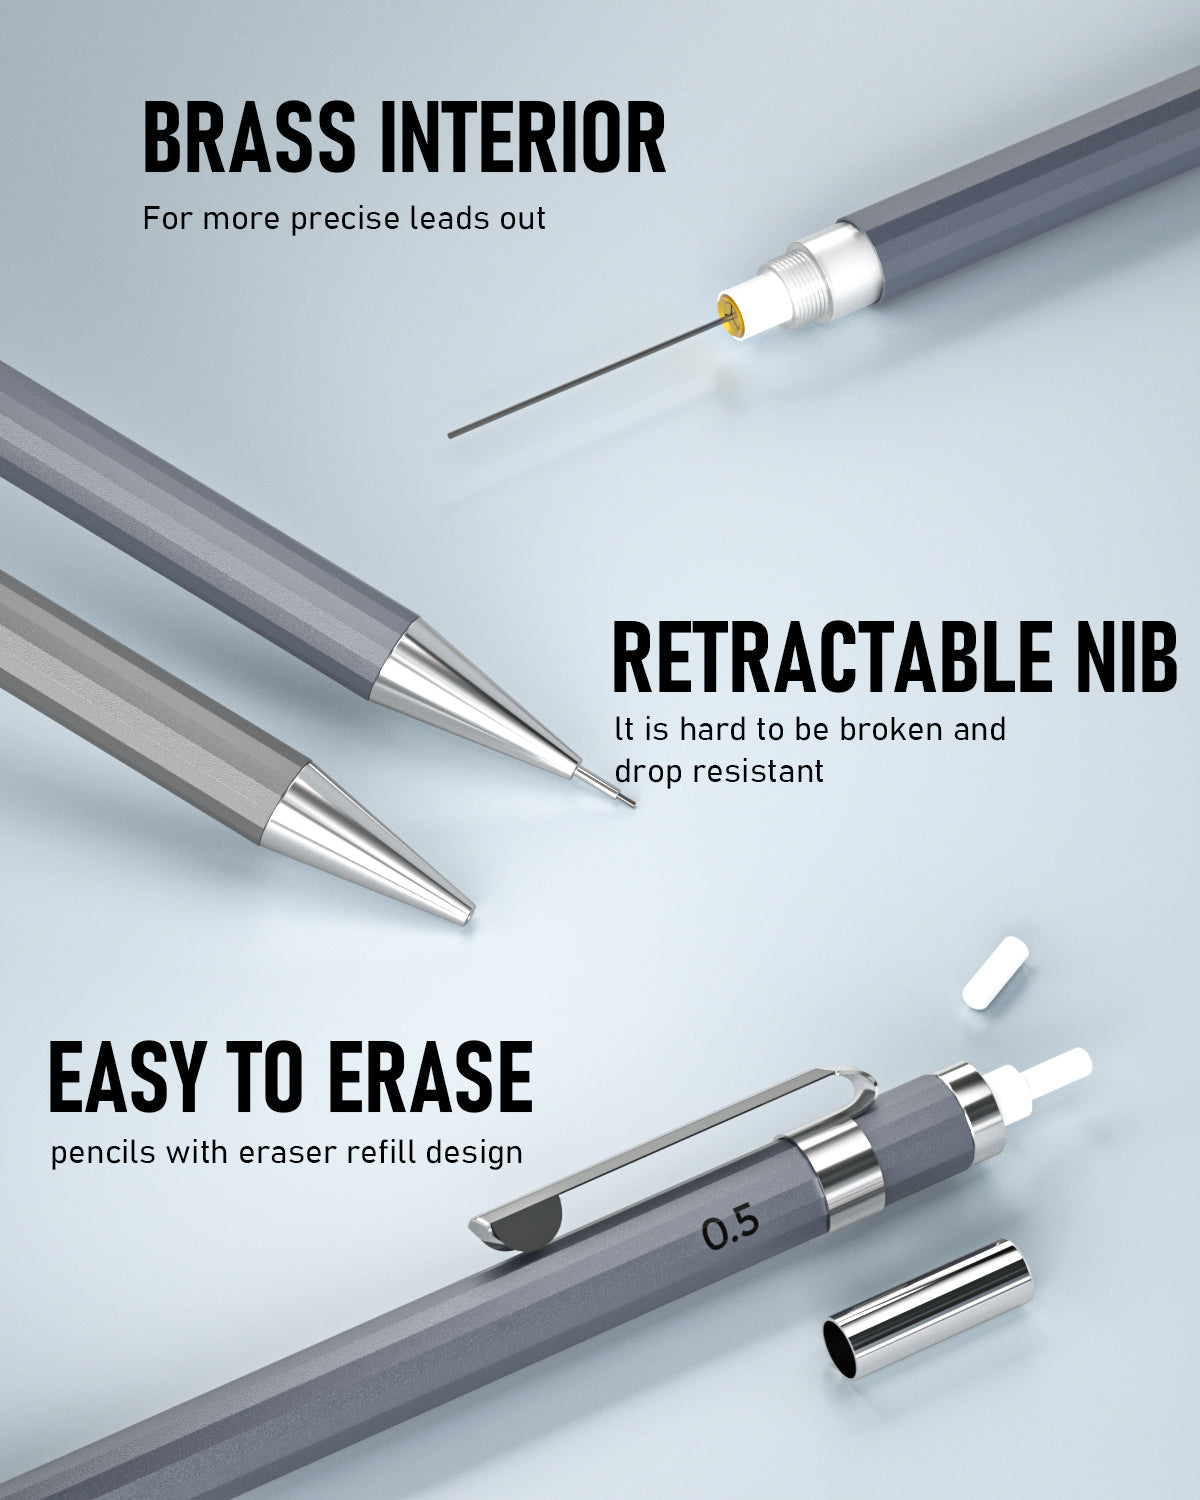 Nicpro 4PCS Metal Mechanical Pencils Set 0.7mm, Lead Drafting Pencil 0.7 mm  with 8 Tube HB #2 Lead Refill, 3PCS 4B Eraser, 9 Eraser Refill for Artist